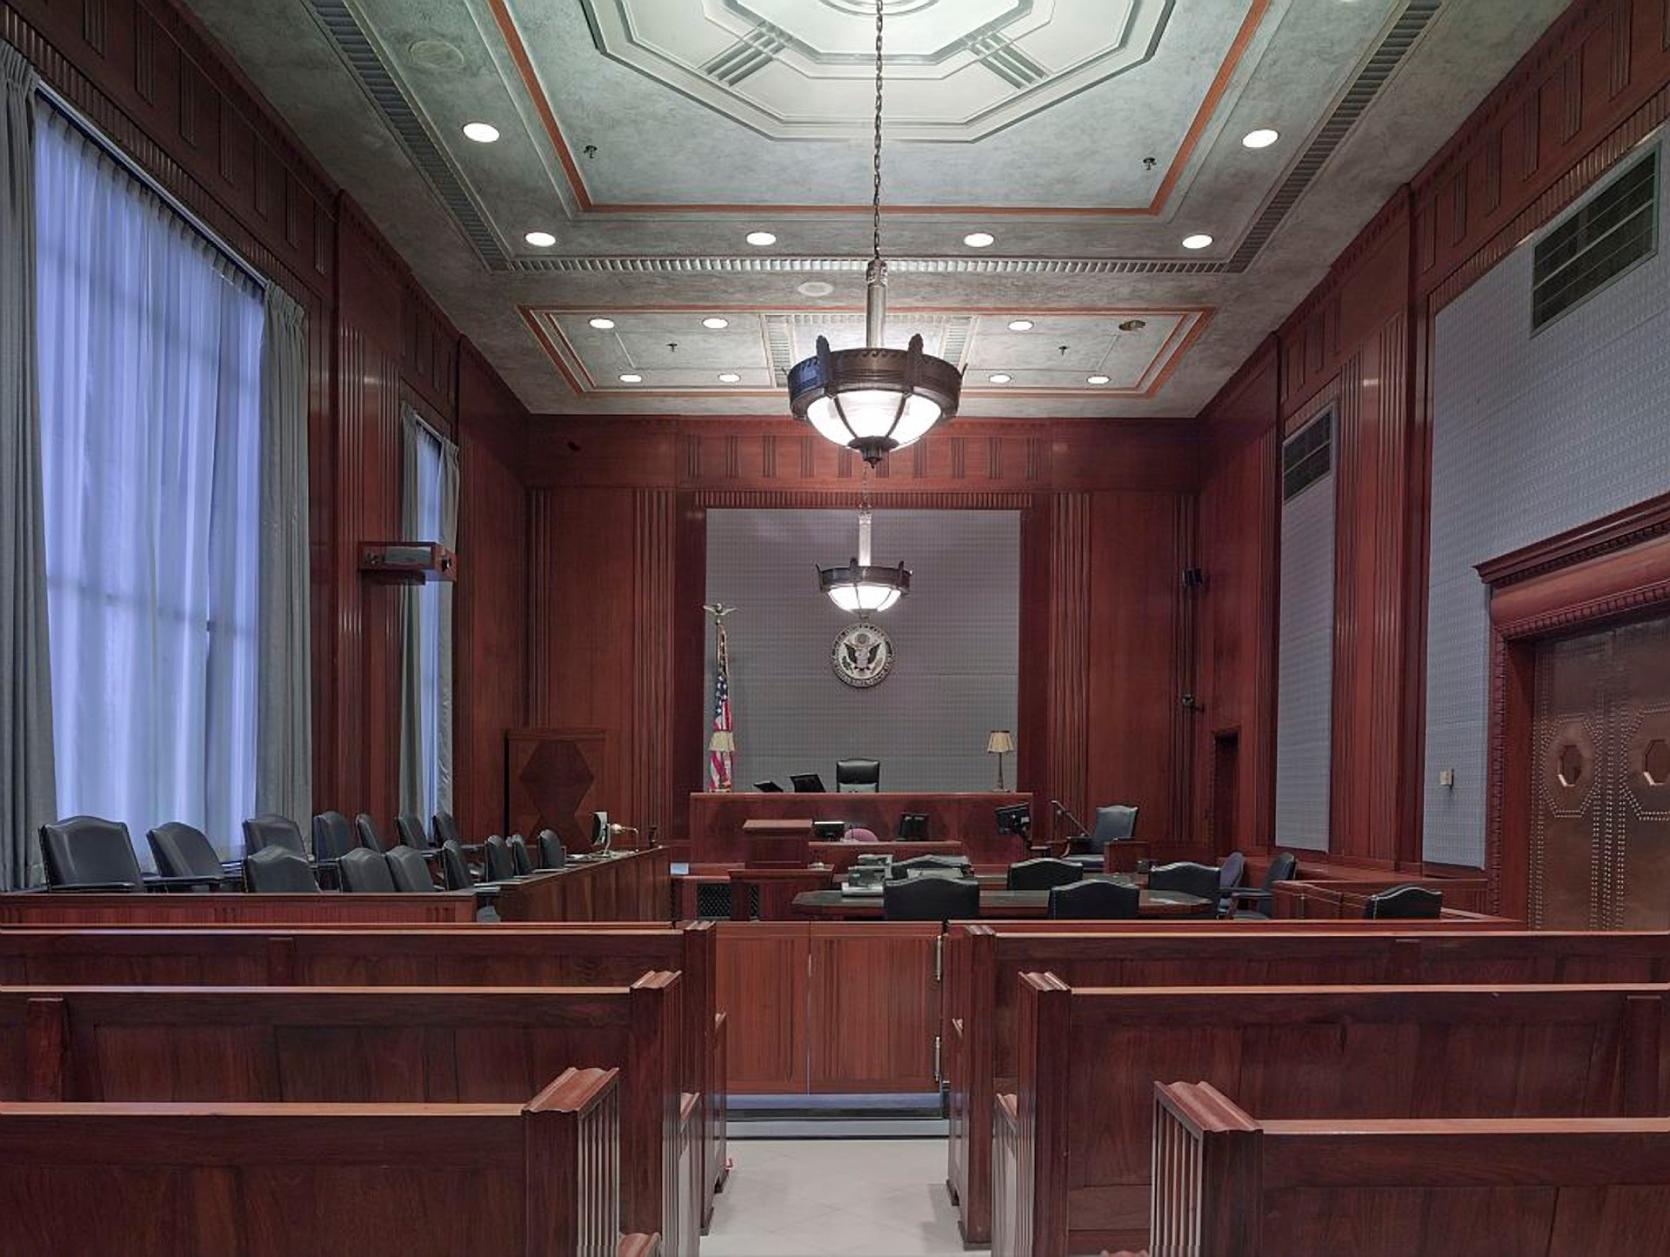 Photo shows a court room.